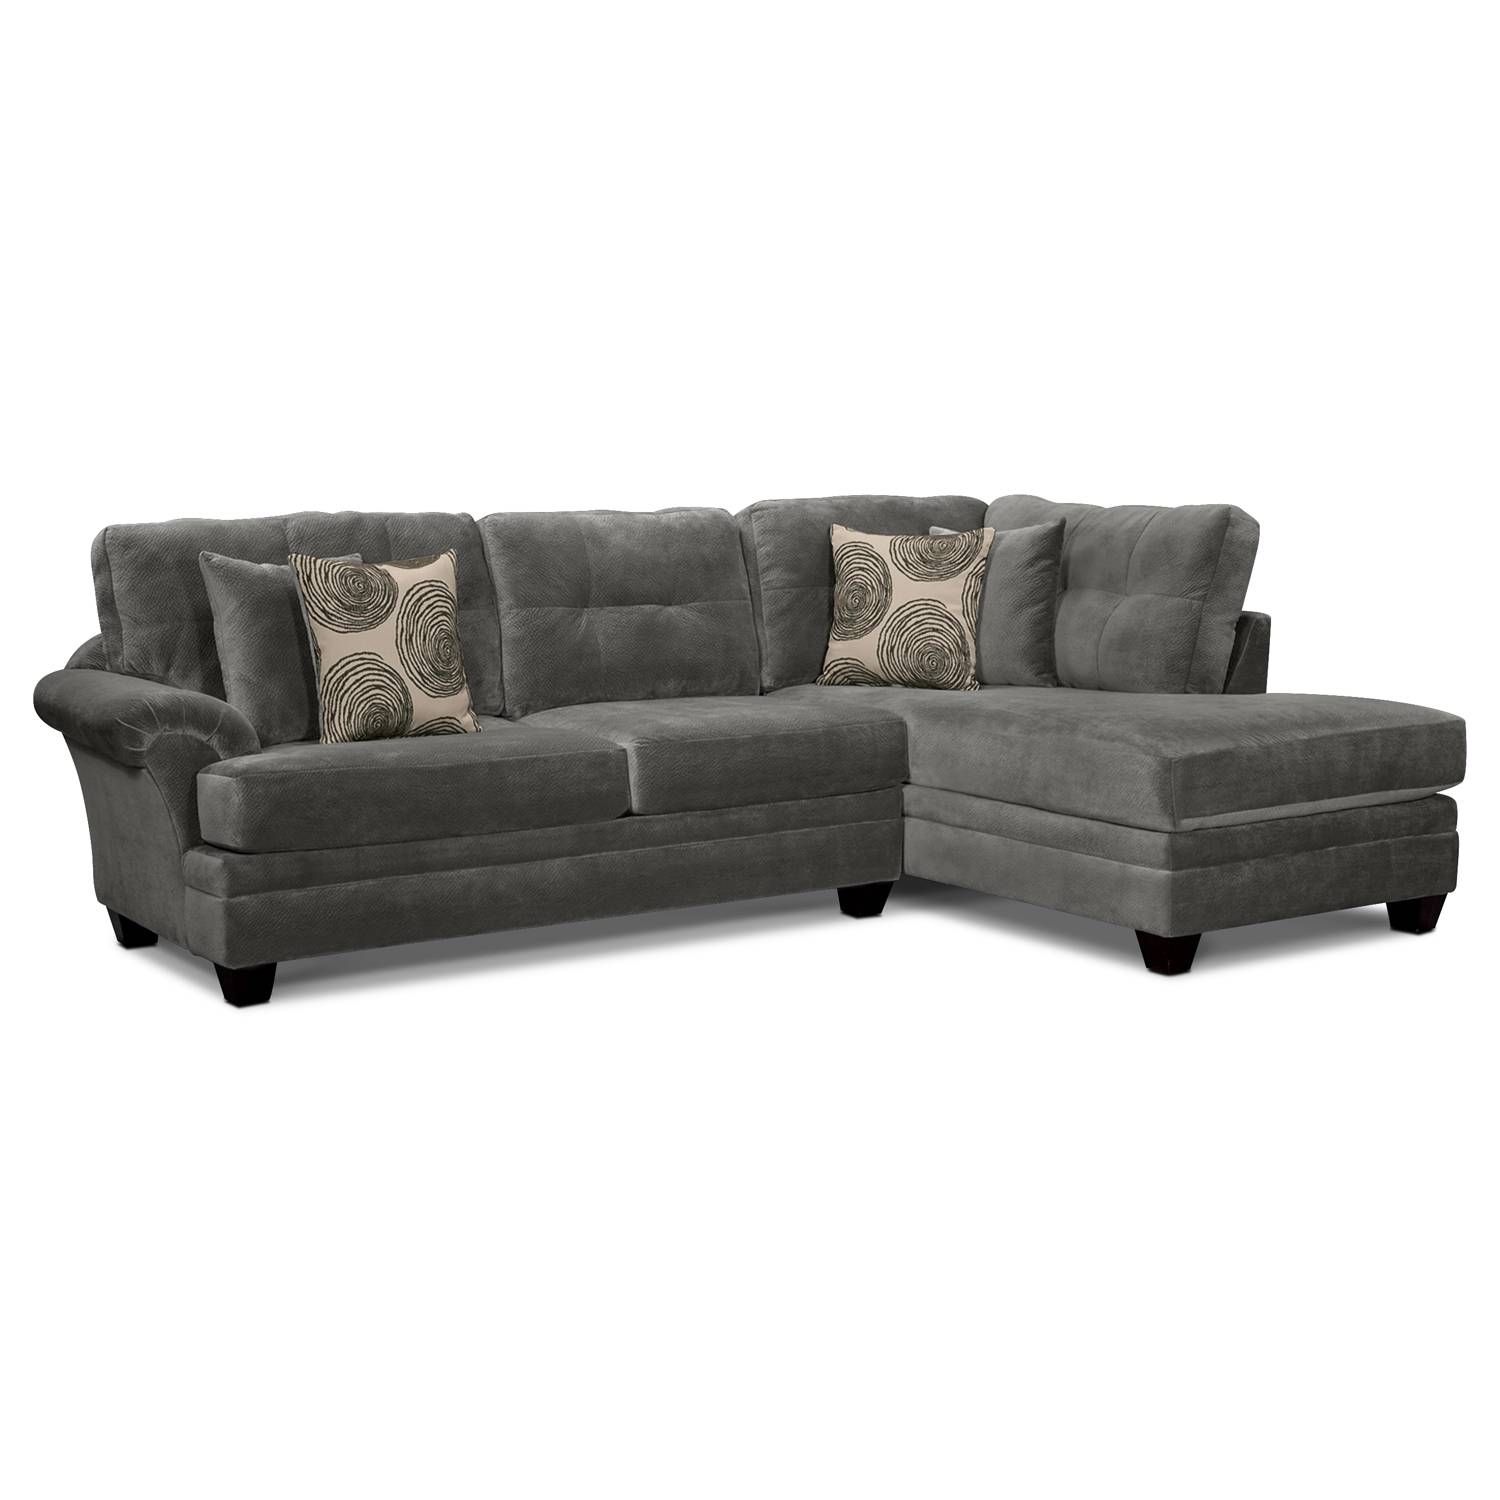 Chaise Lounge Sofa Value City Furniture – Thesecretconsul Throughout Value City Sofas (View 19 of 25)